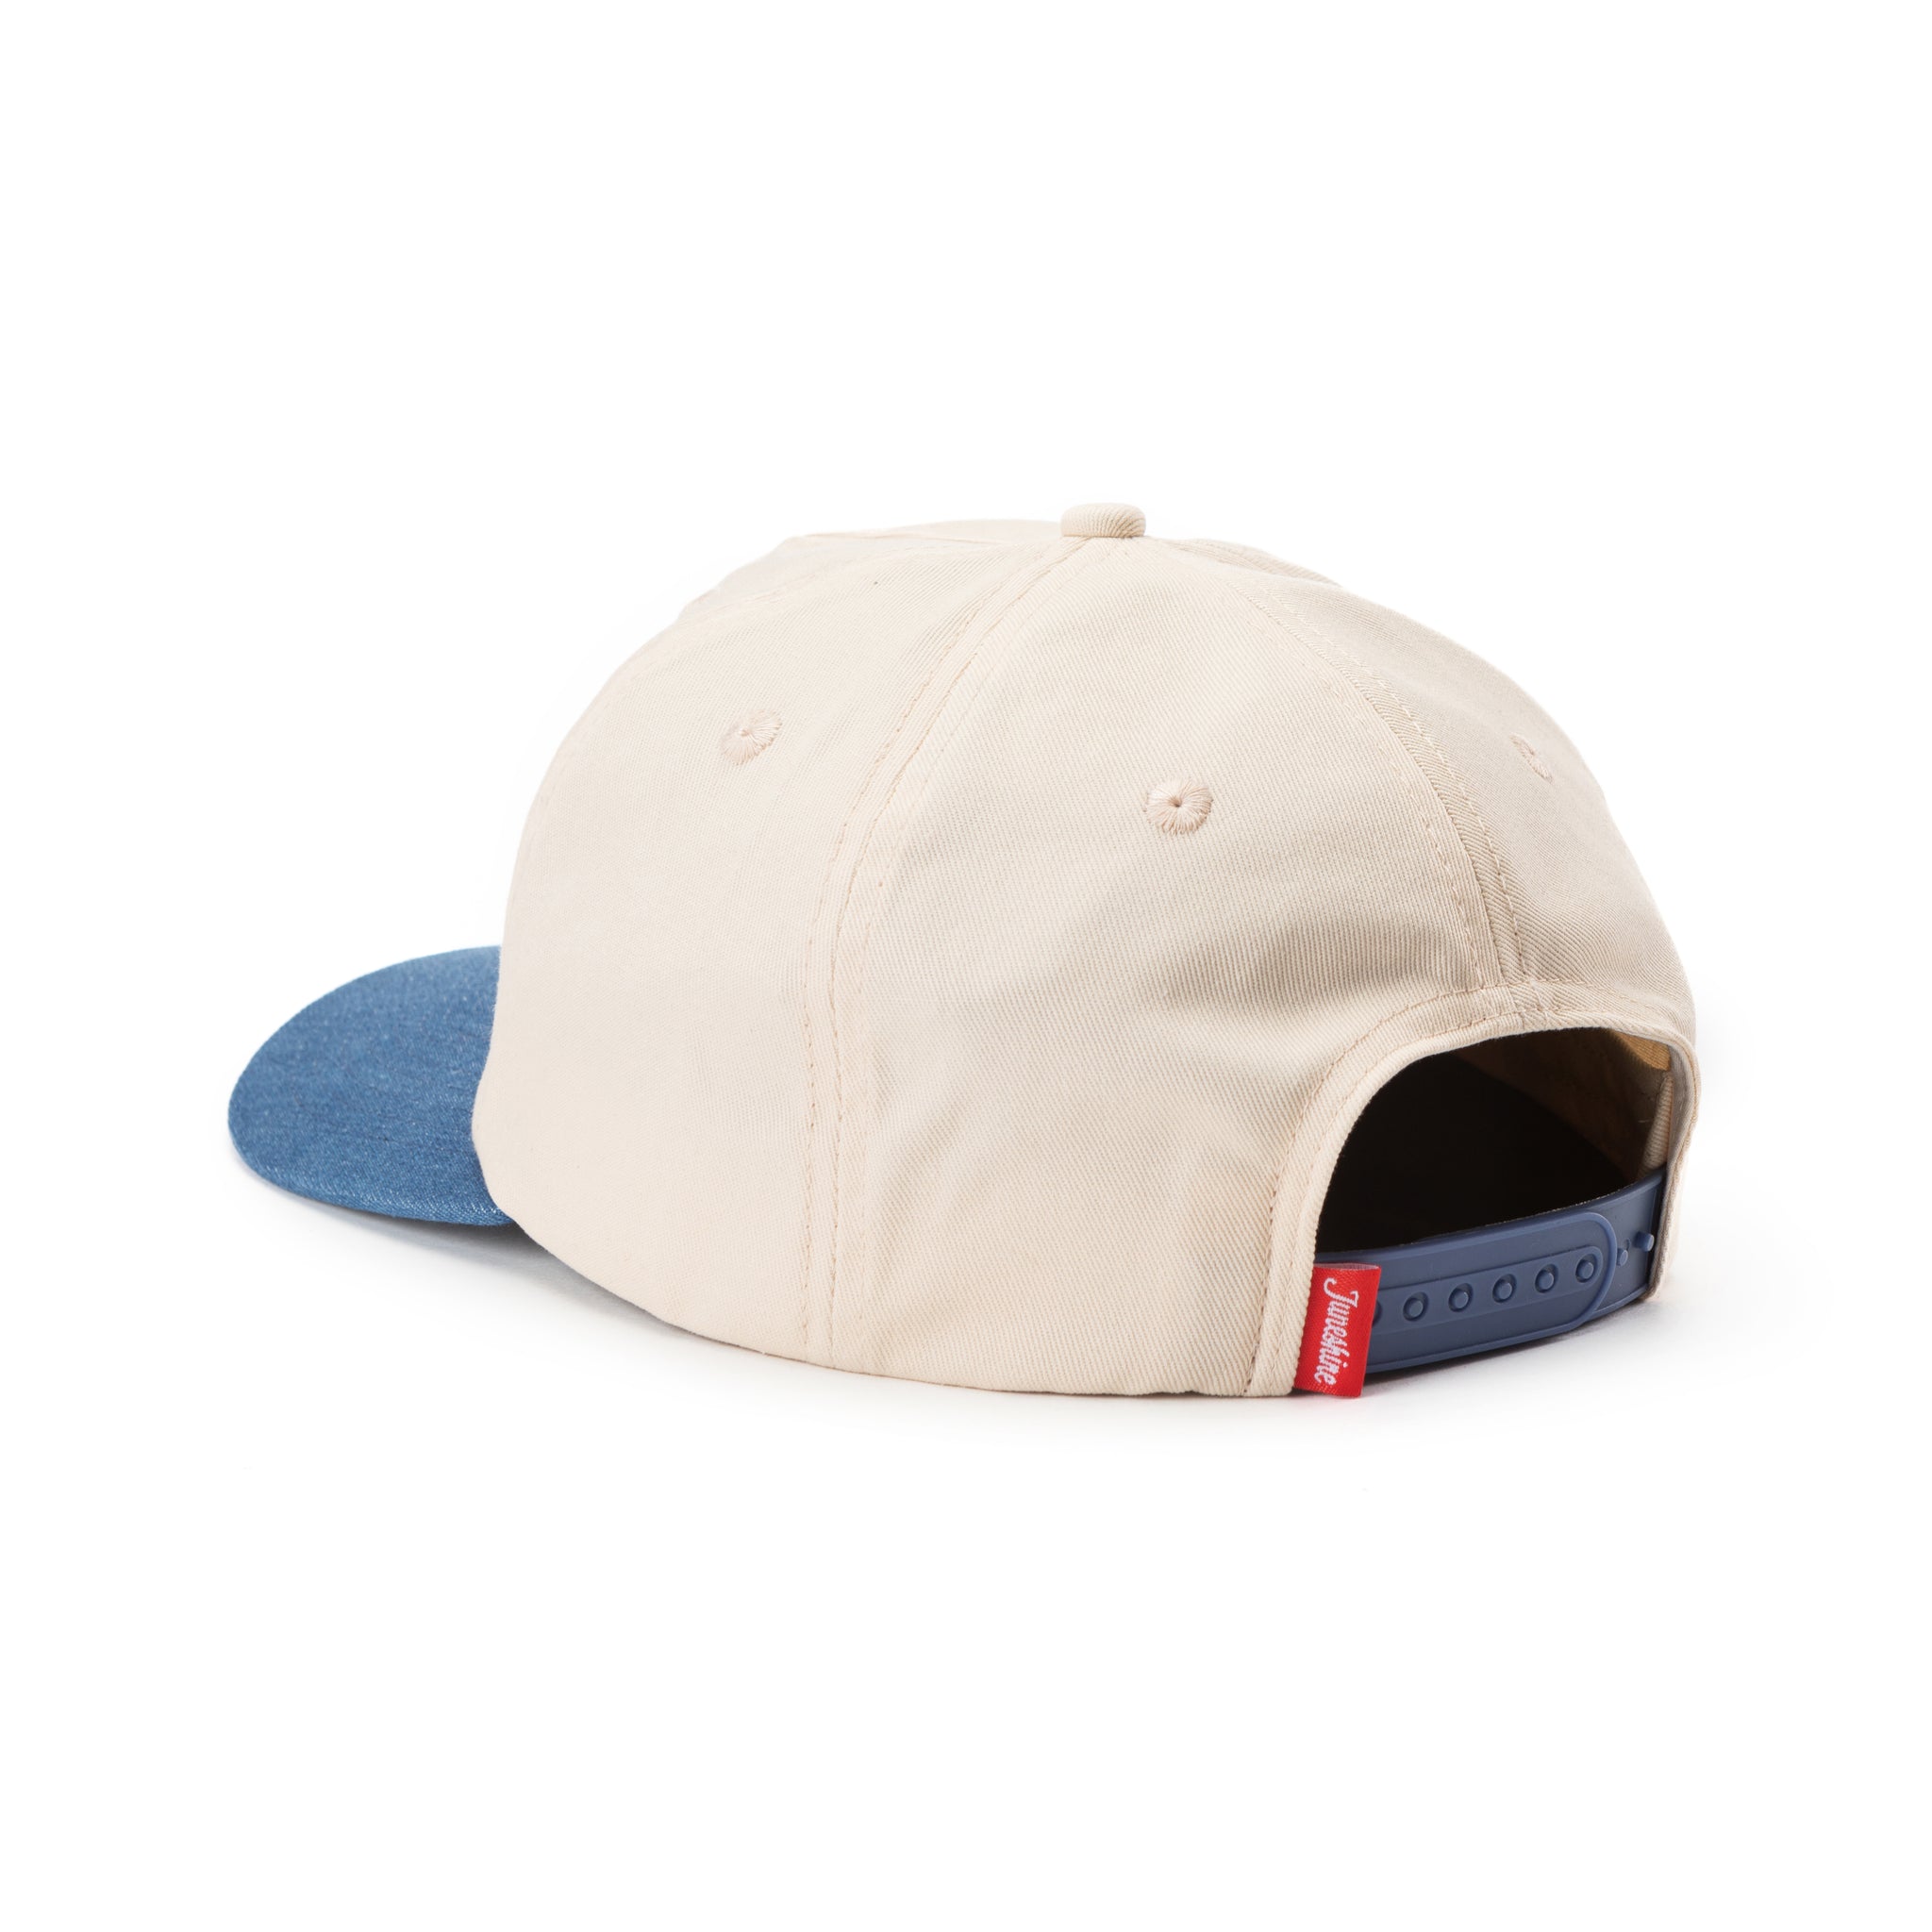 Back view of White hat with blue denim brim and blue snap back adjustment for sizing with a red tag that reads: June shine